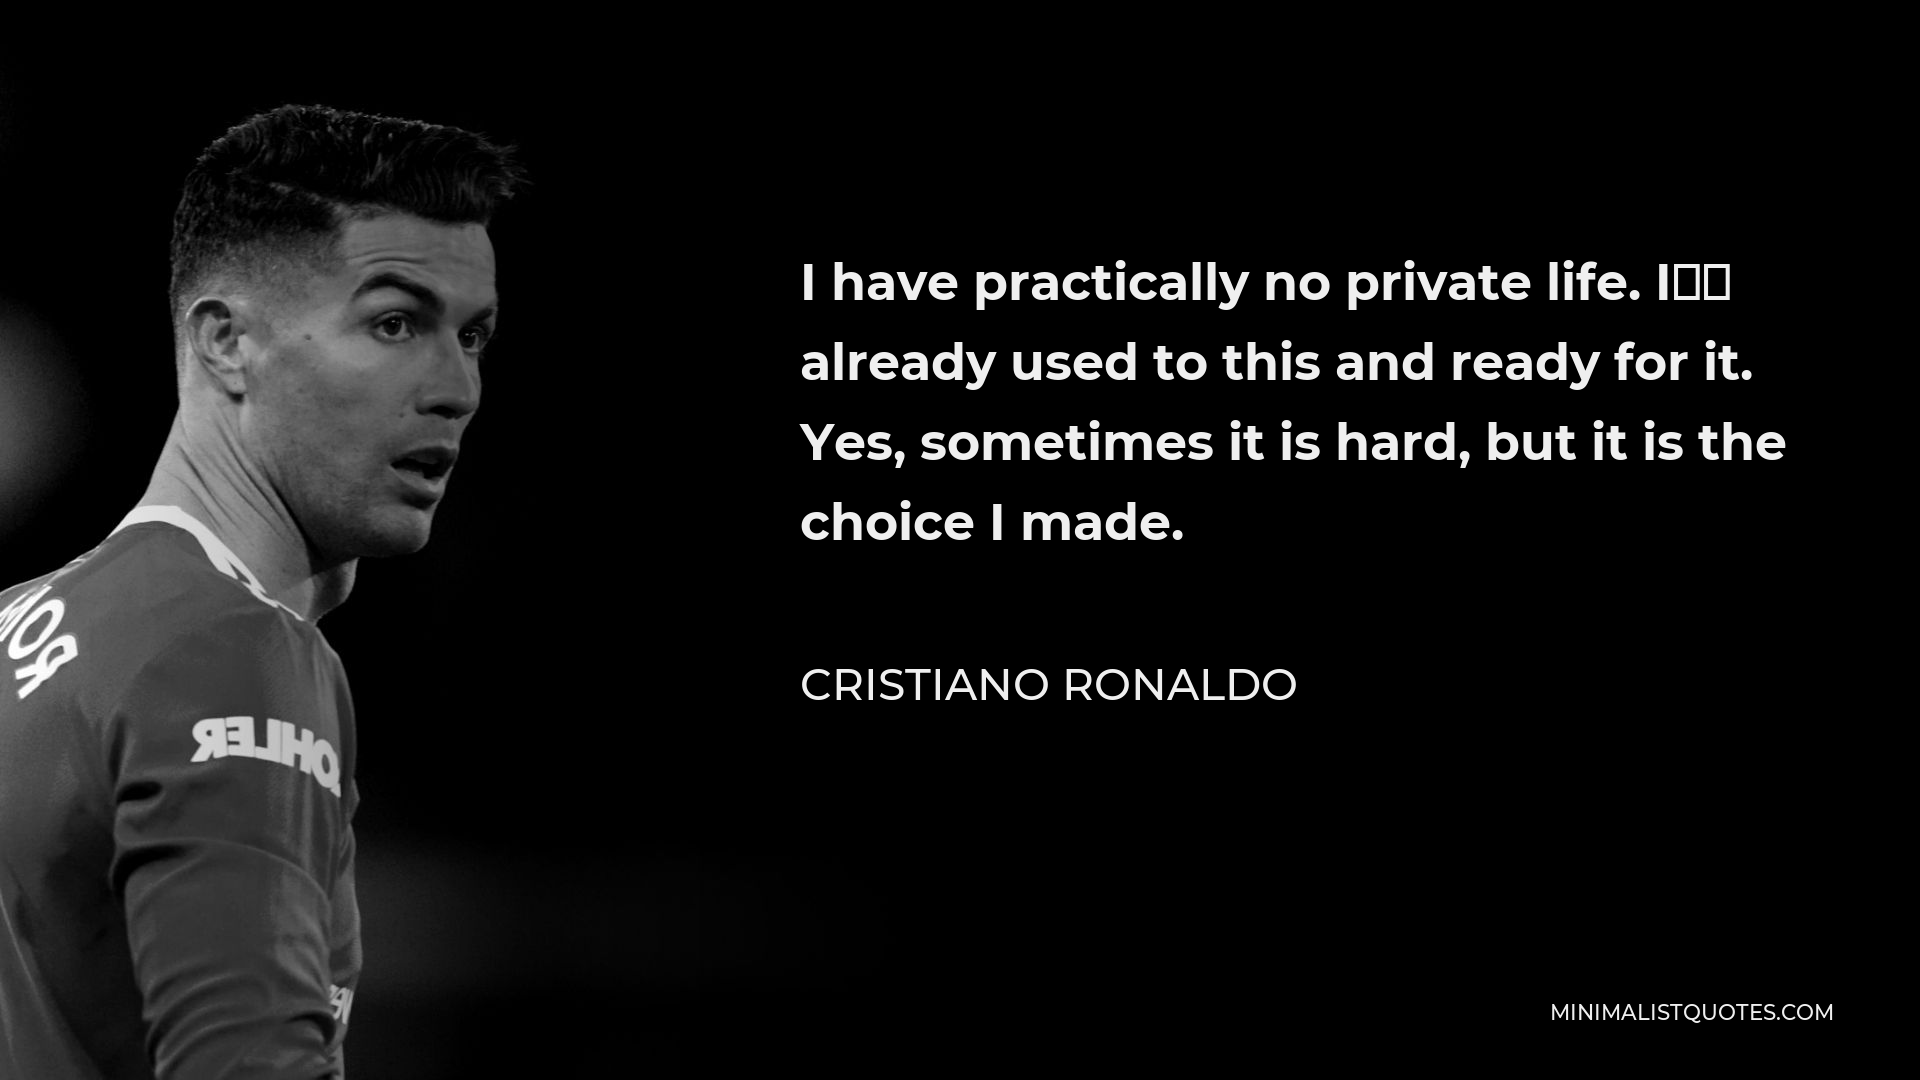 Cristiano Ronaldo Quote - I have practically no private life. I’m already used to this and ready for it. Yes, sometimes it is hard, but it is the choice I made.